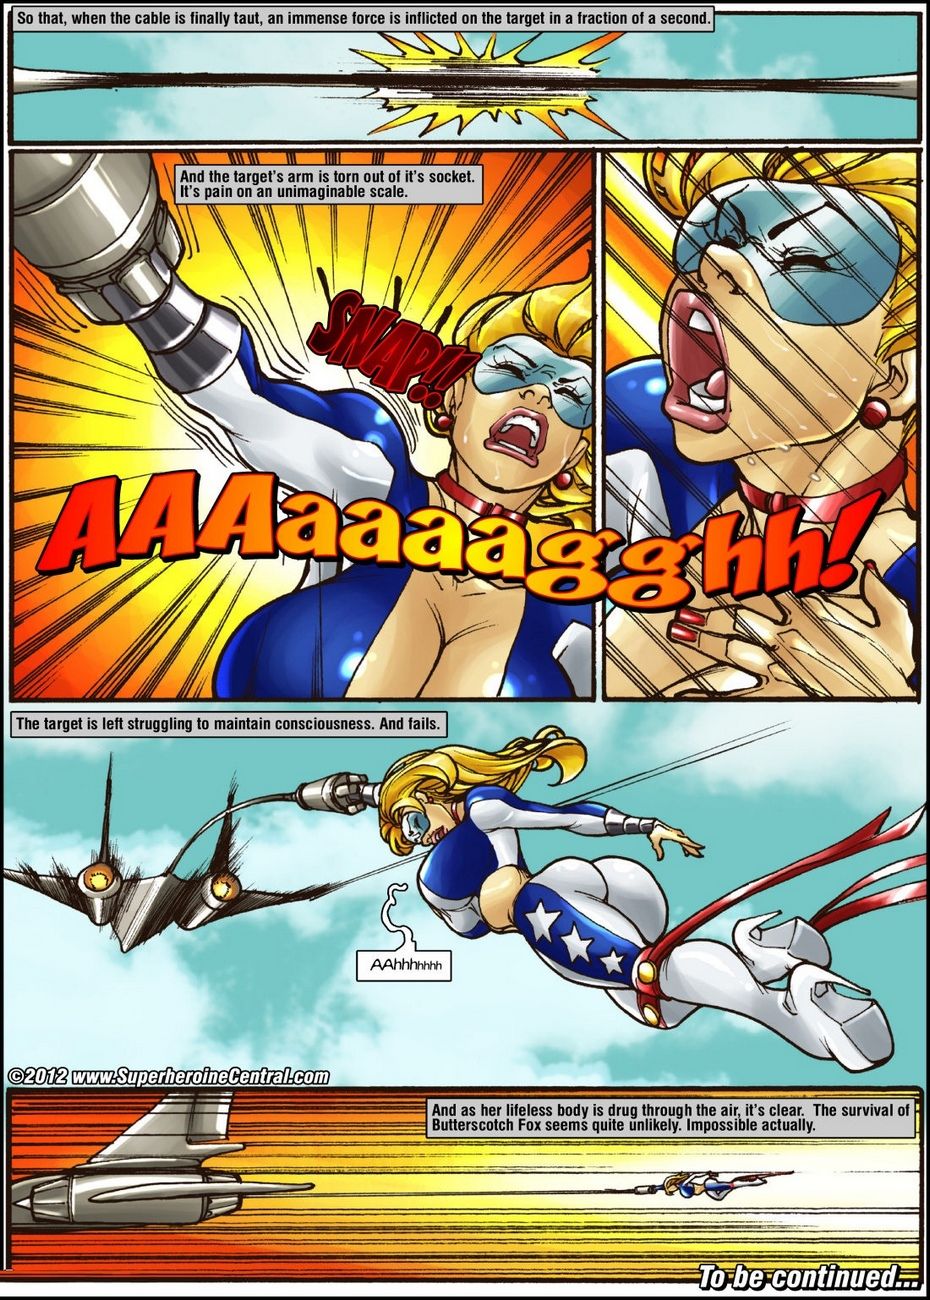 American Angel 1 - Smart Weapon page 11